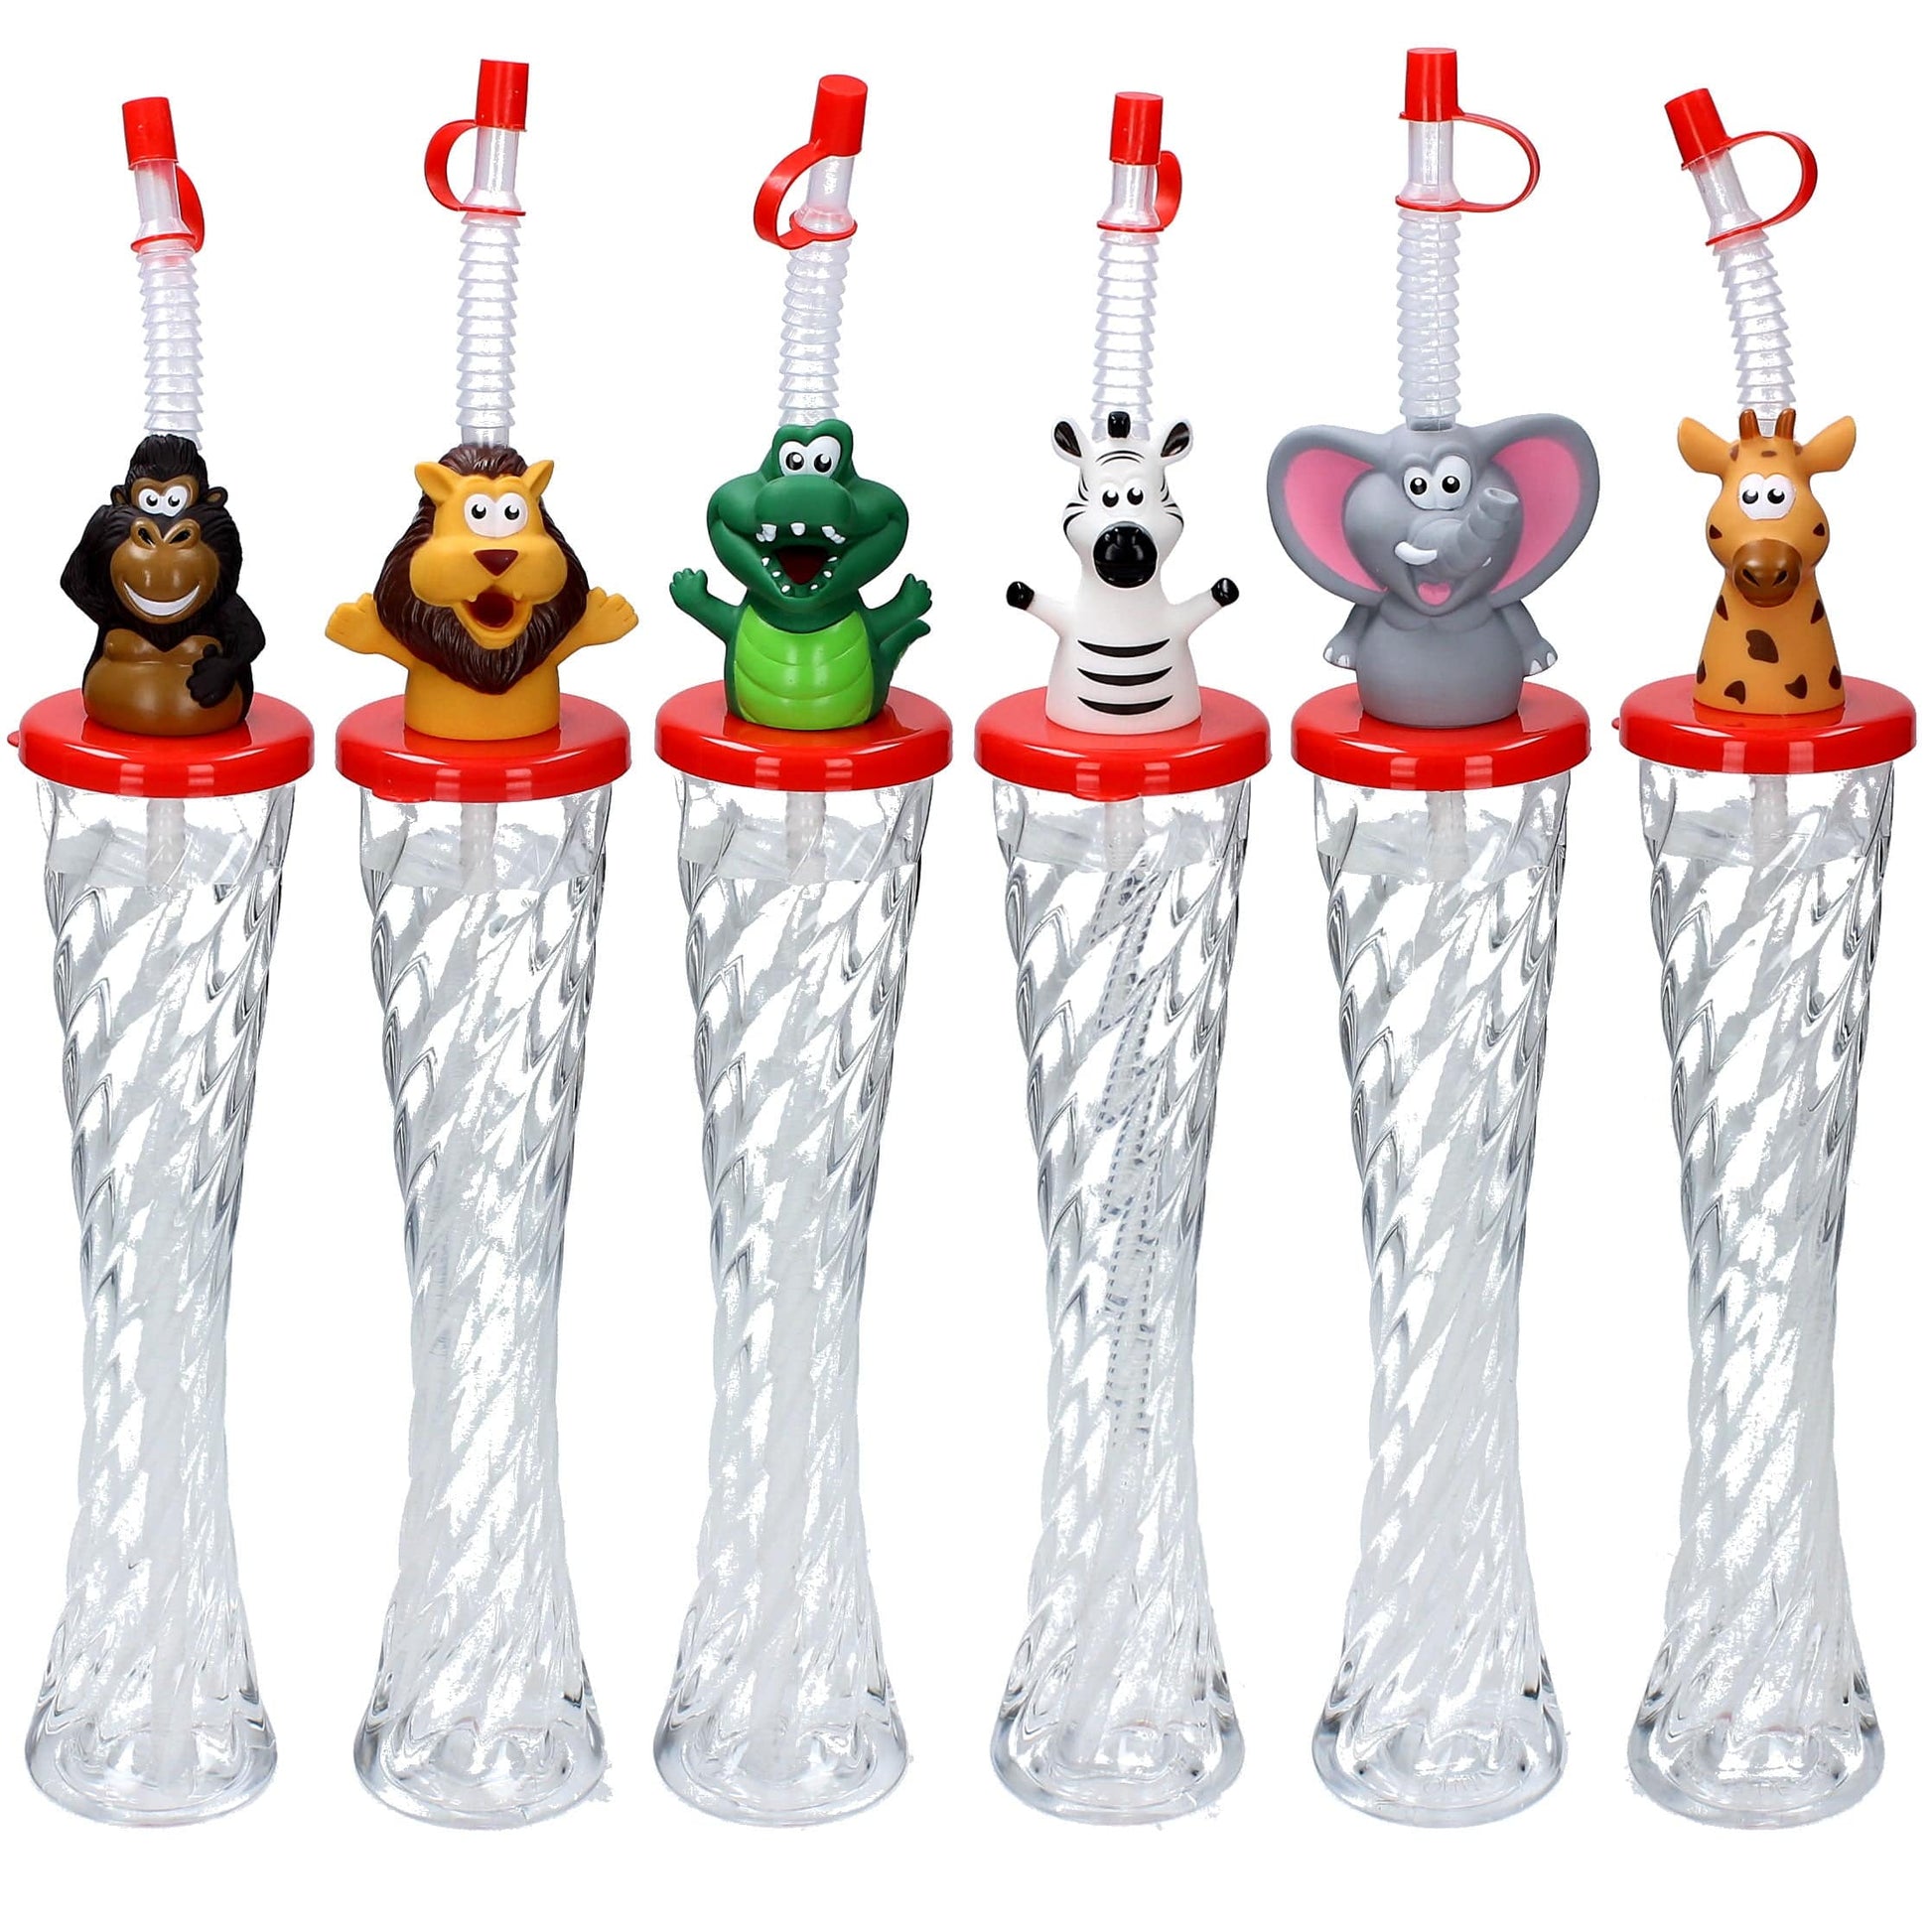 Sweet World USA Yard Cups LAND Animals Animals Twisty Cups (54 Cups) - for Cold or Frozen Drinks, Kids Parties - 12 oz. (350 ml) cups with lids and straws